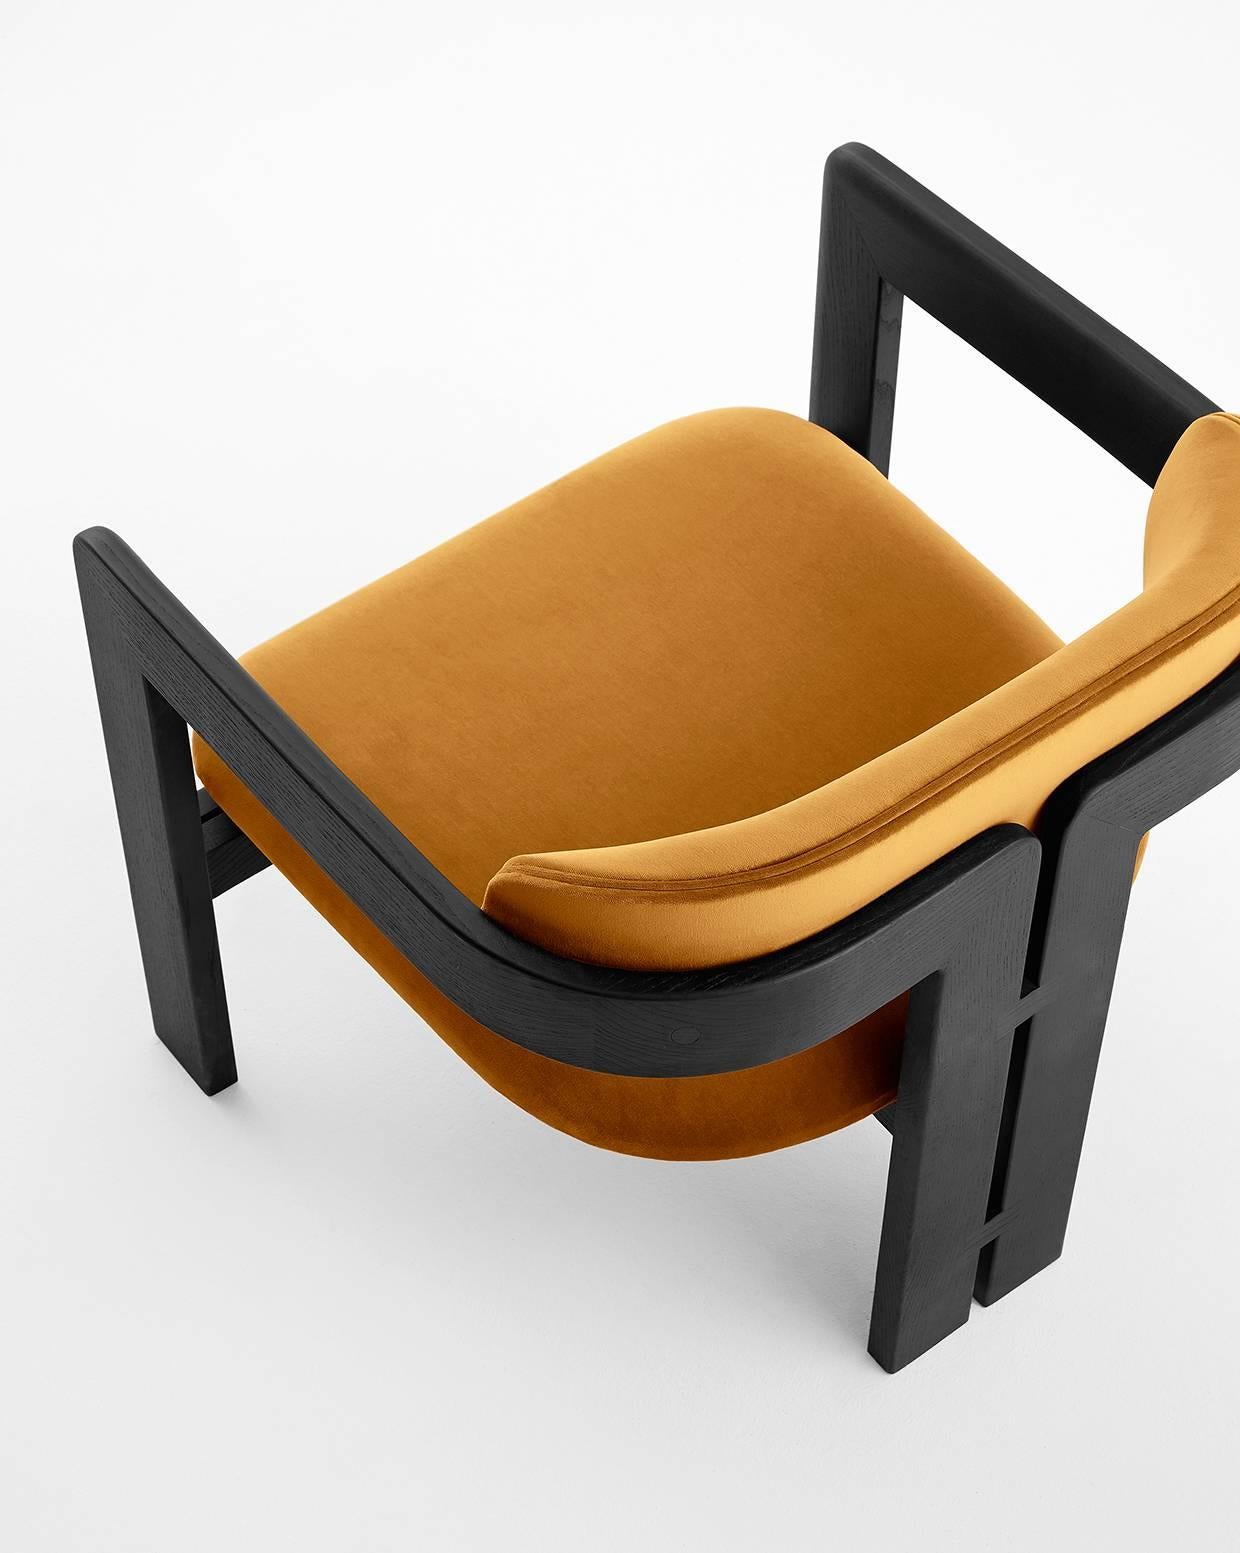 Armchair with black lacquered open pore ash structure. Available also in natural ash, tobacco stained or white open pore lacquered ash. Seat and backrest covered by fabric or leather.

Please inquire for fabric options. COM also available upon